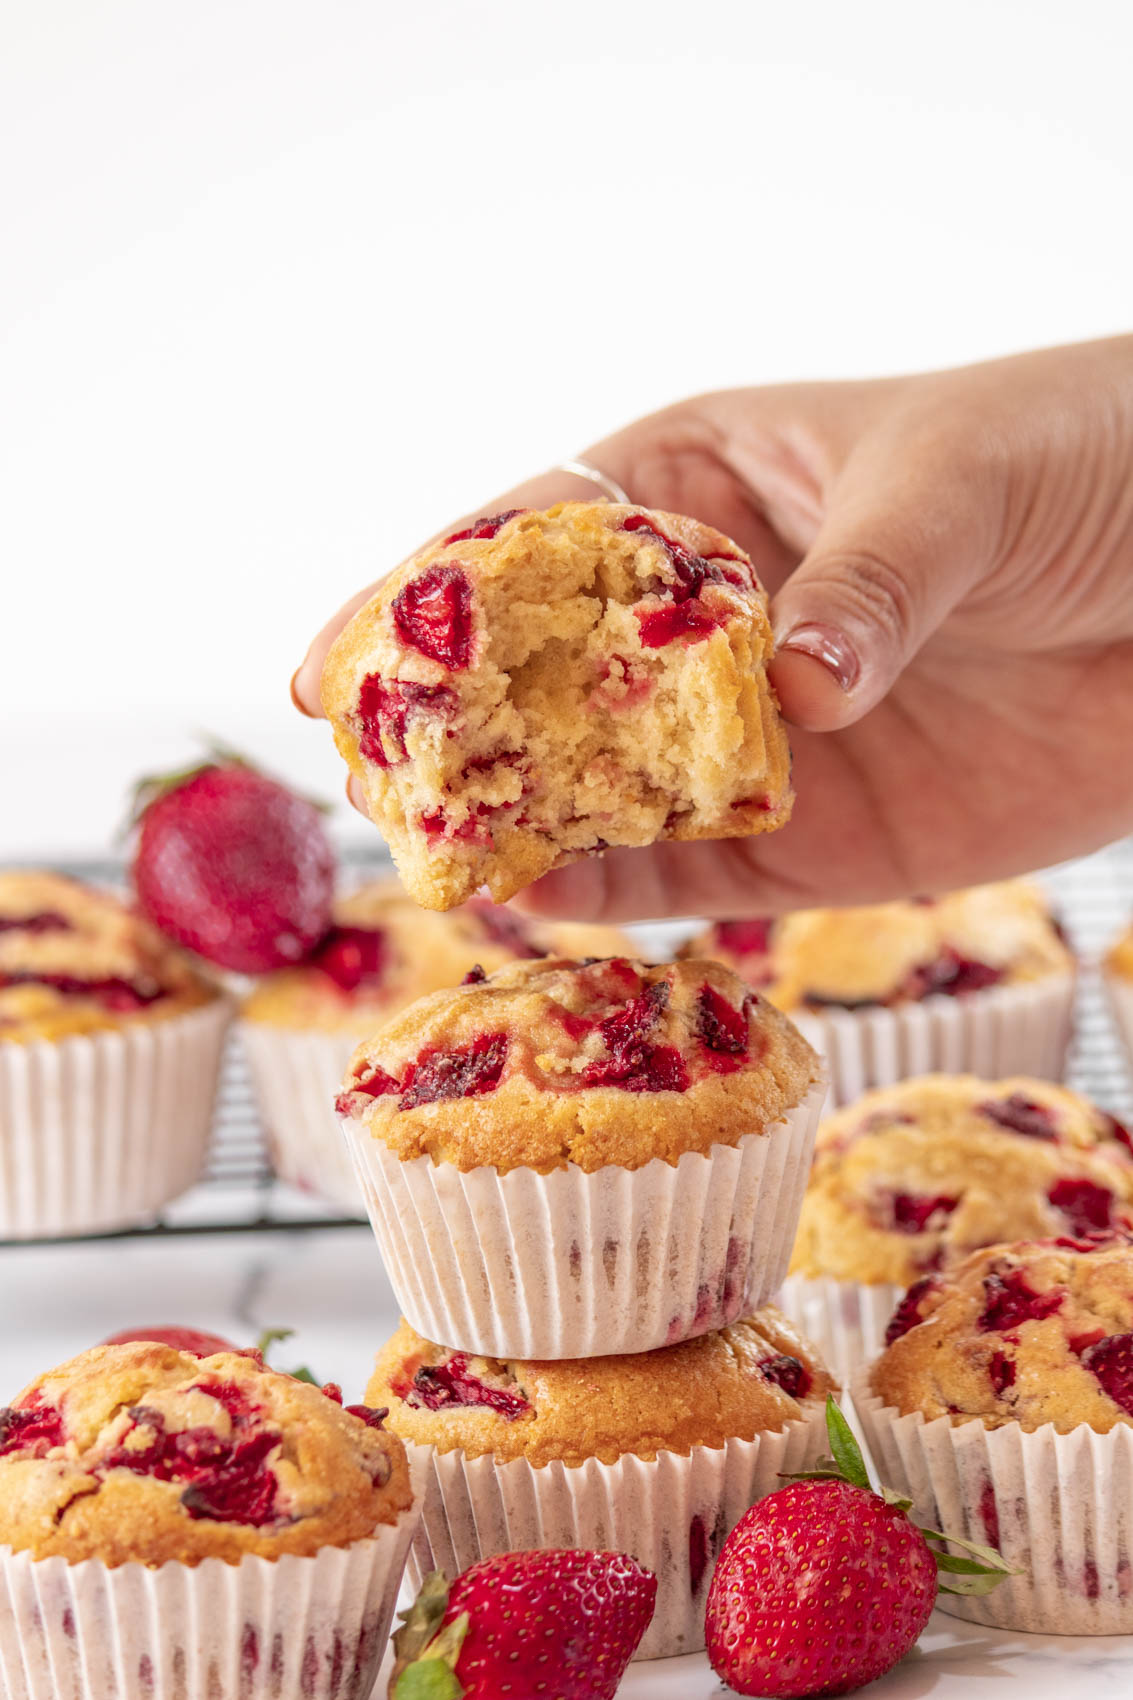 hand grabbing a strawberry muffin with a bite taken from it from a pile of muffins below